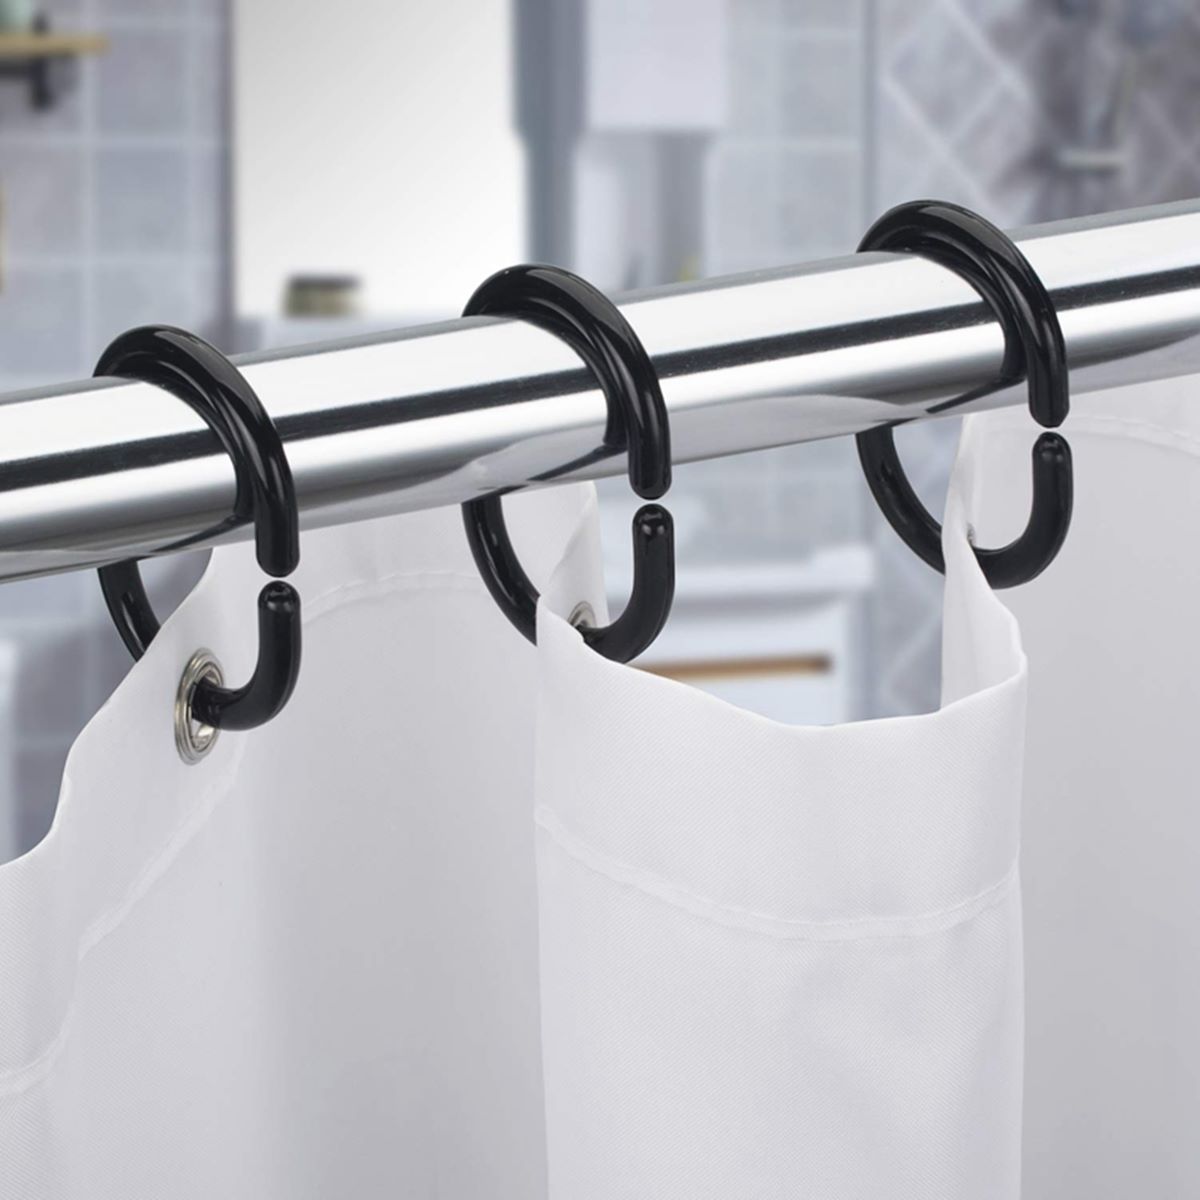 15 Incredible Plastic Shower Curtain Hooks for 2023